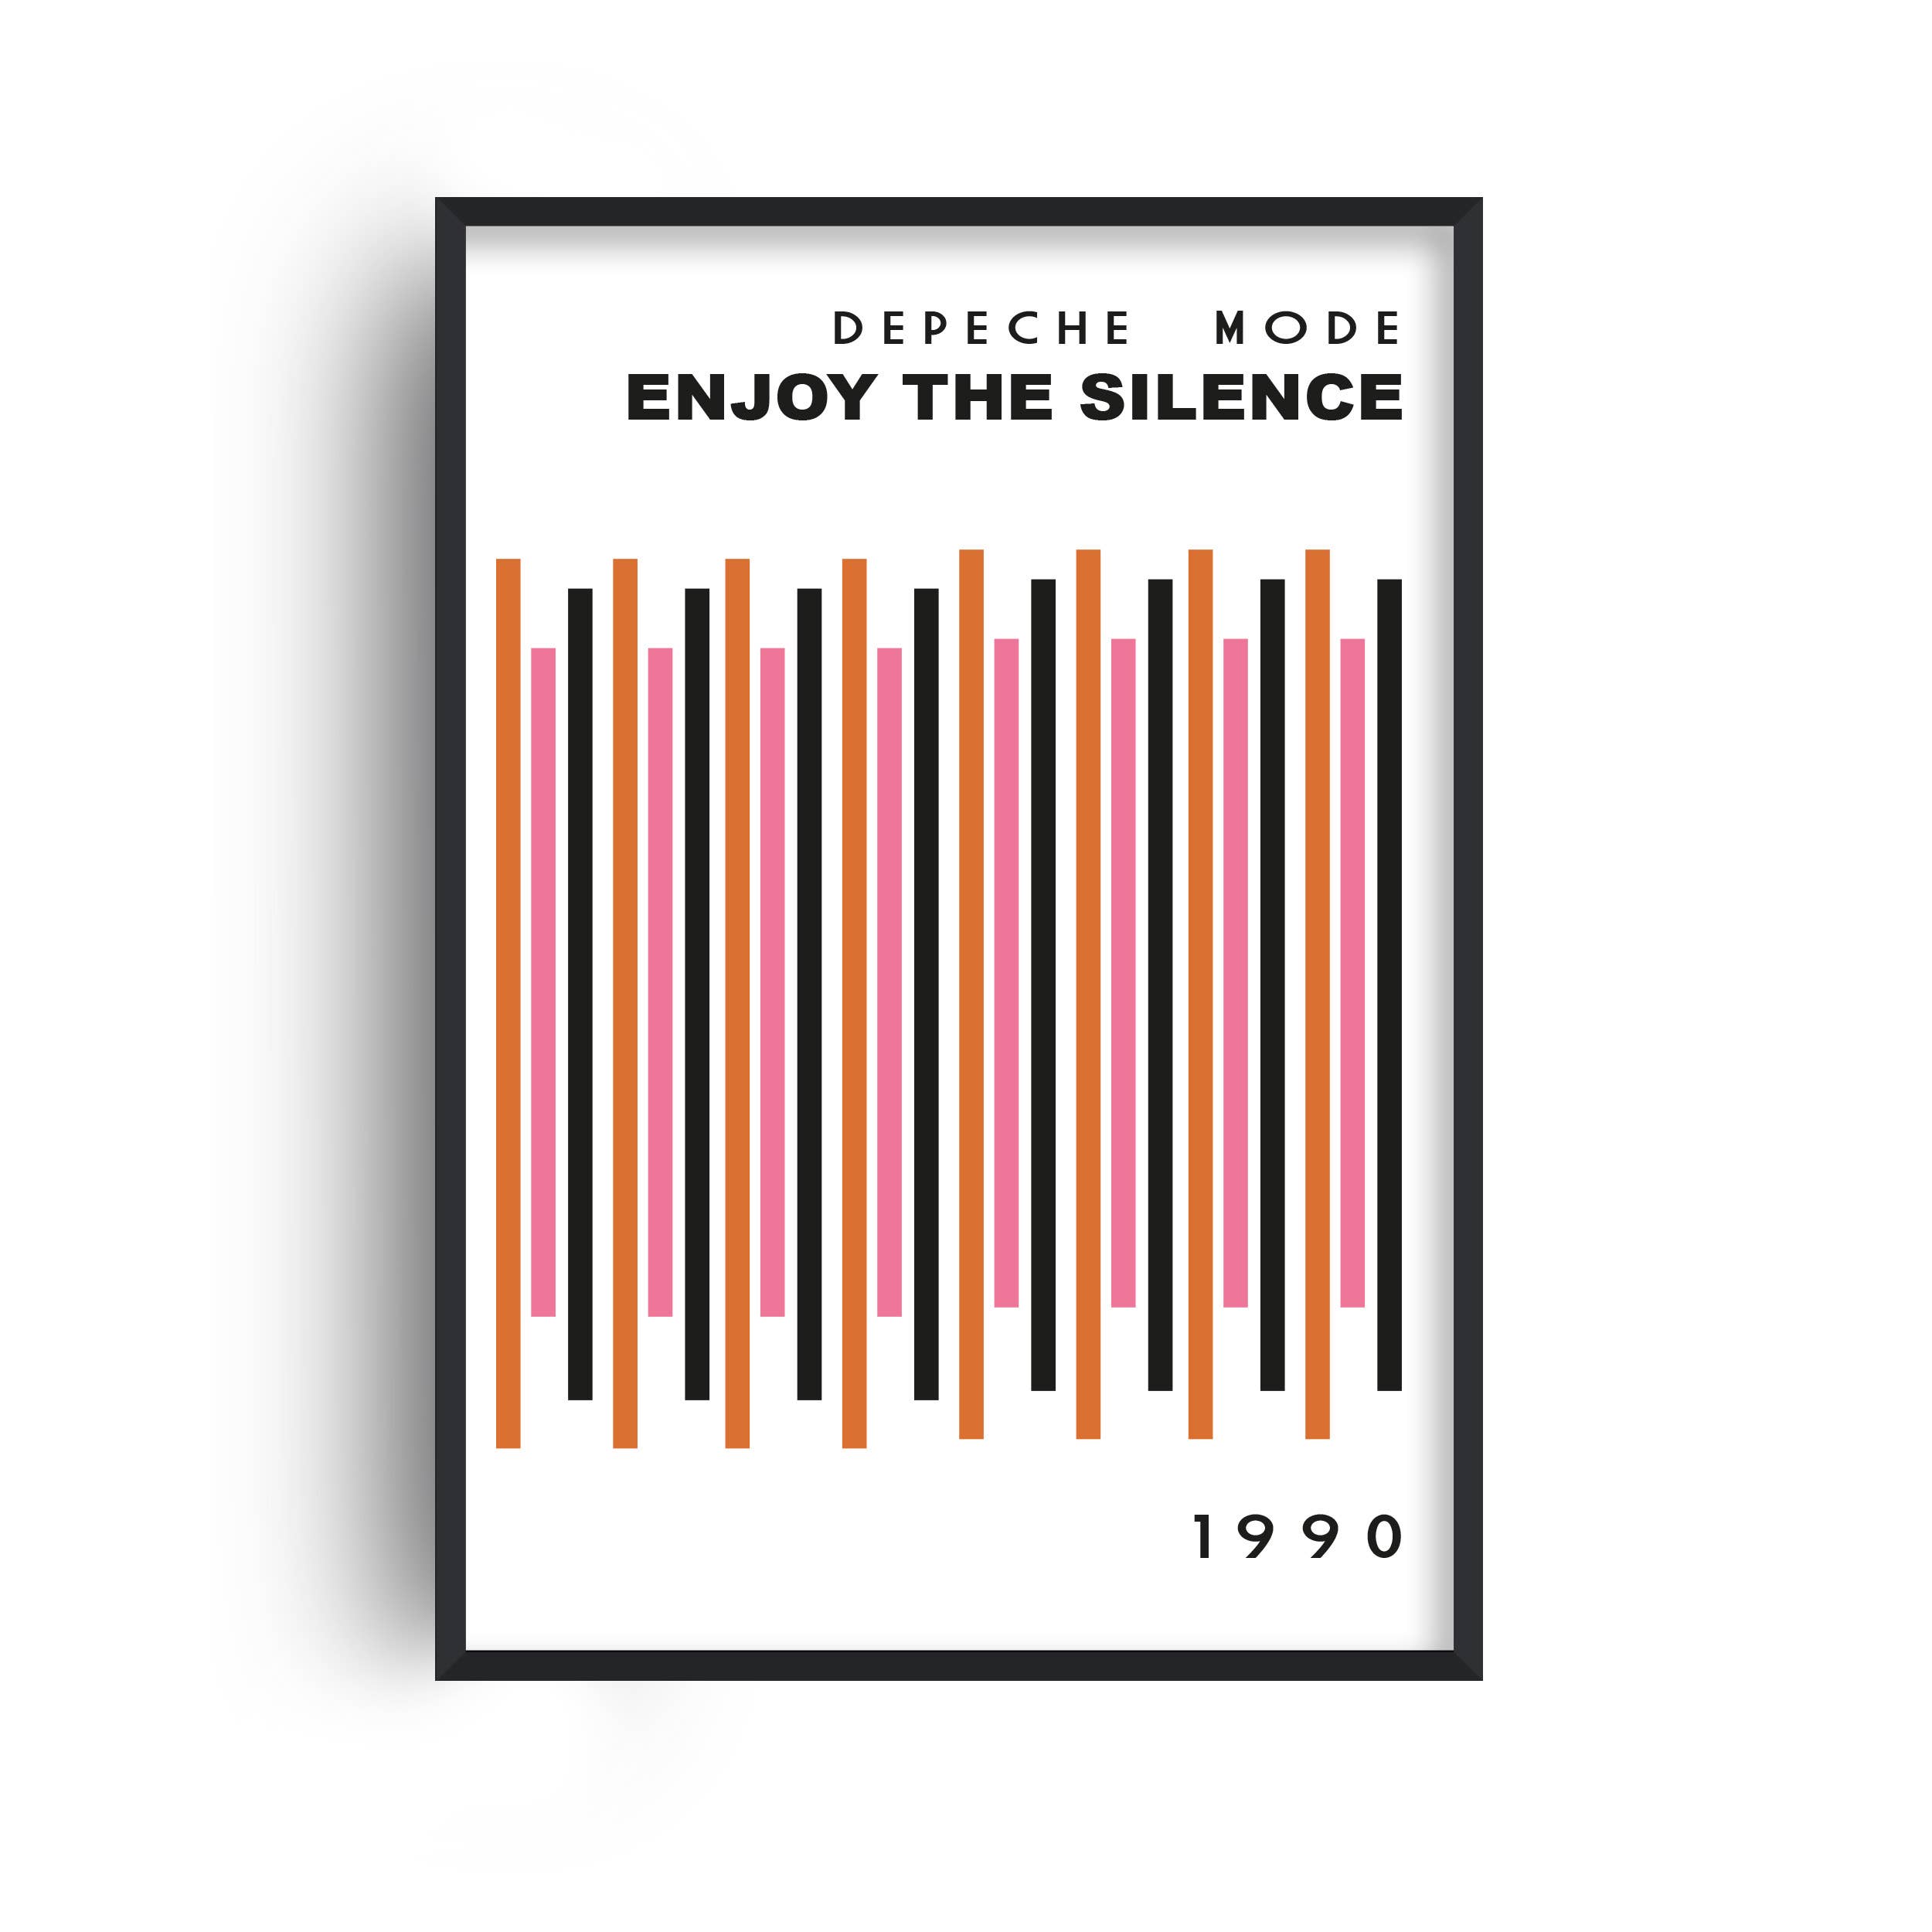 Enjoy the Silence Depeche Mode Inspired  Art Print - Out of the Blue